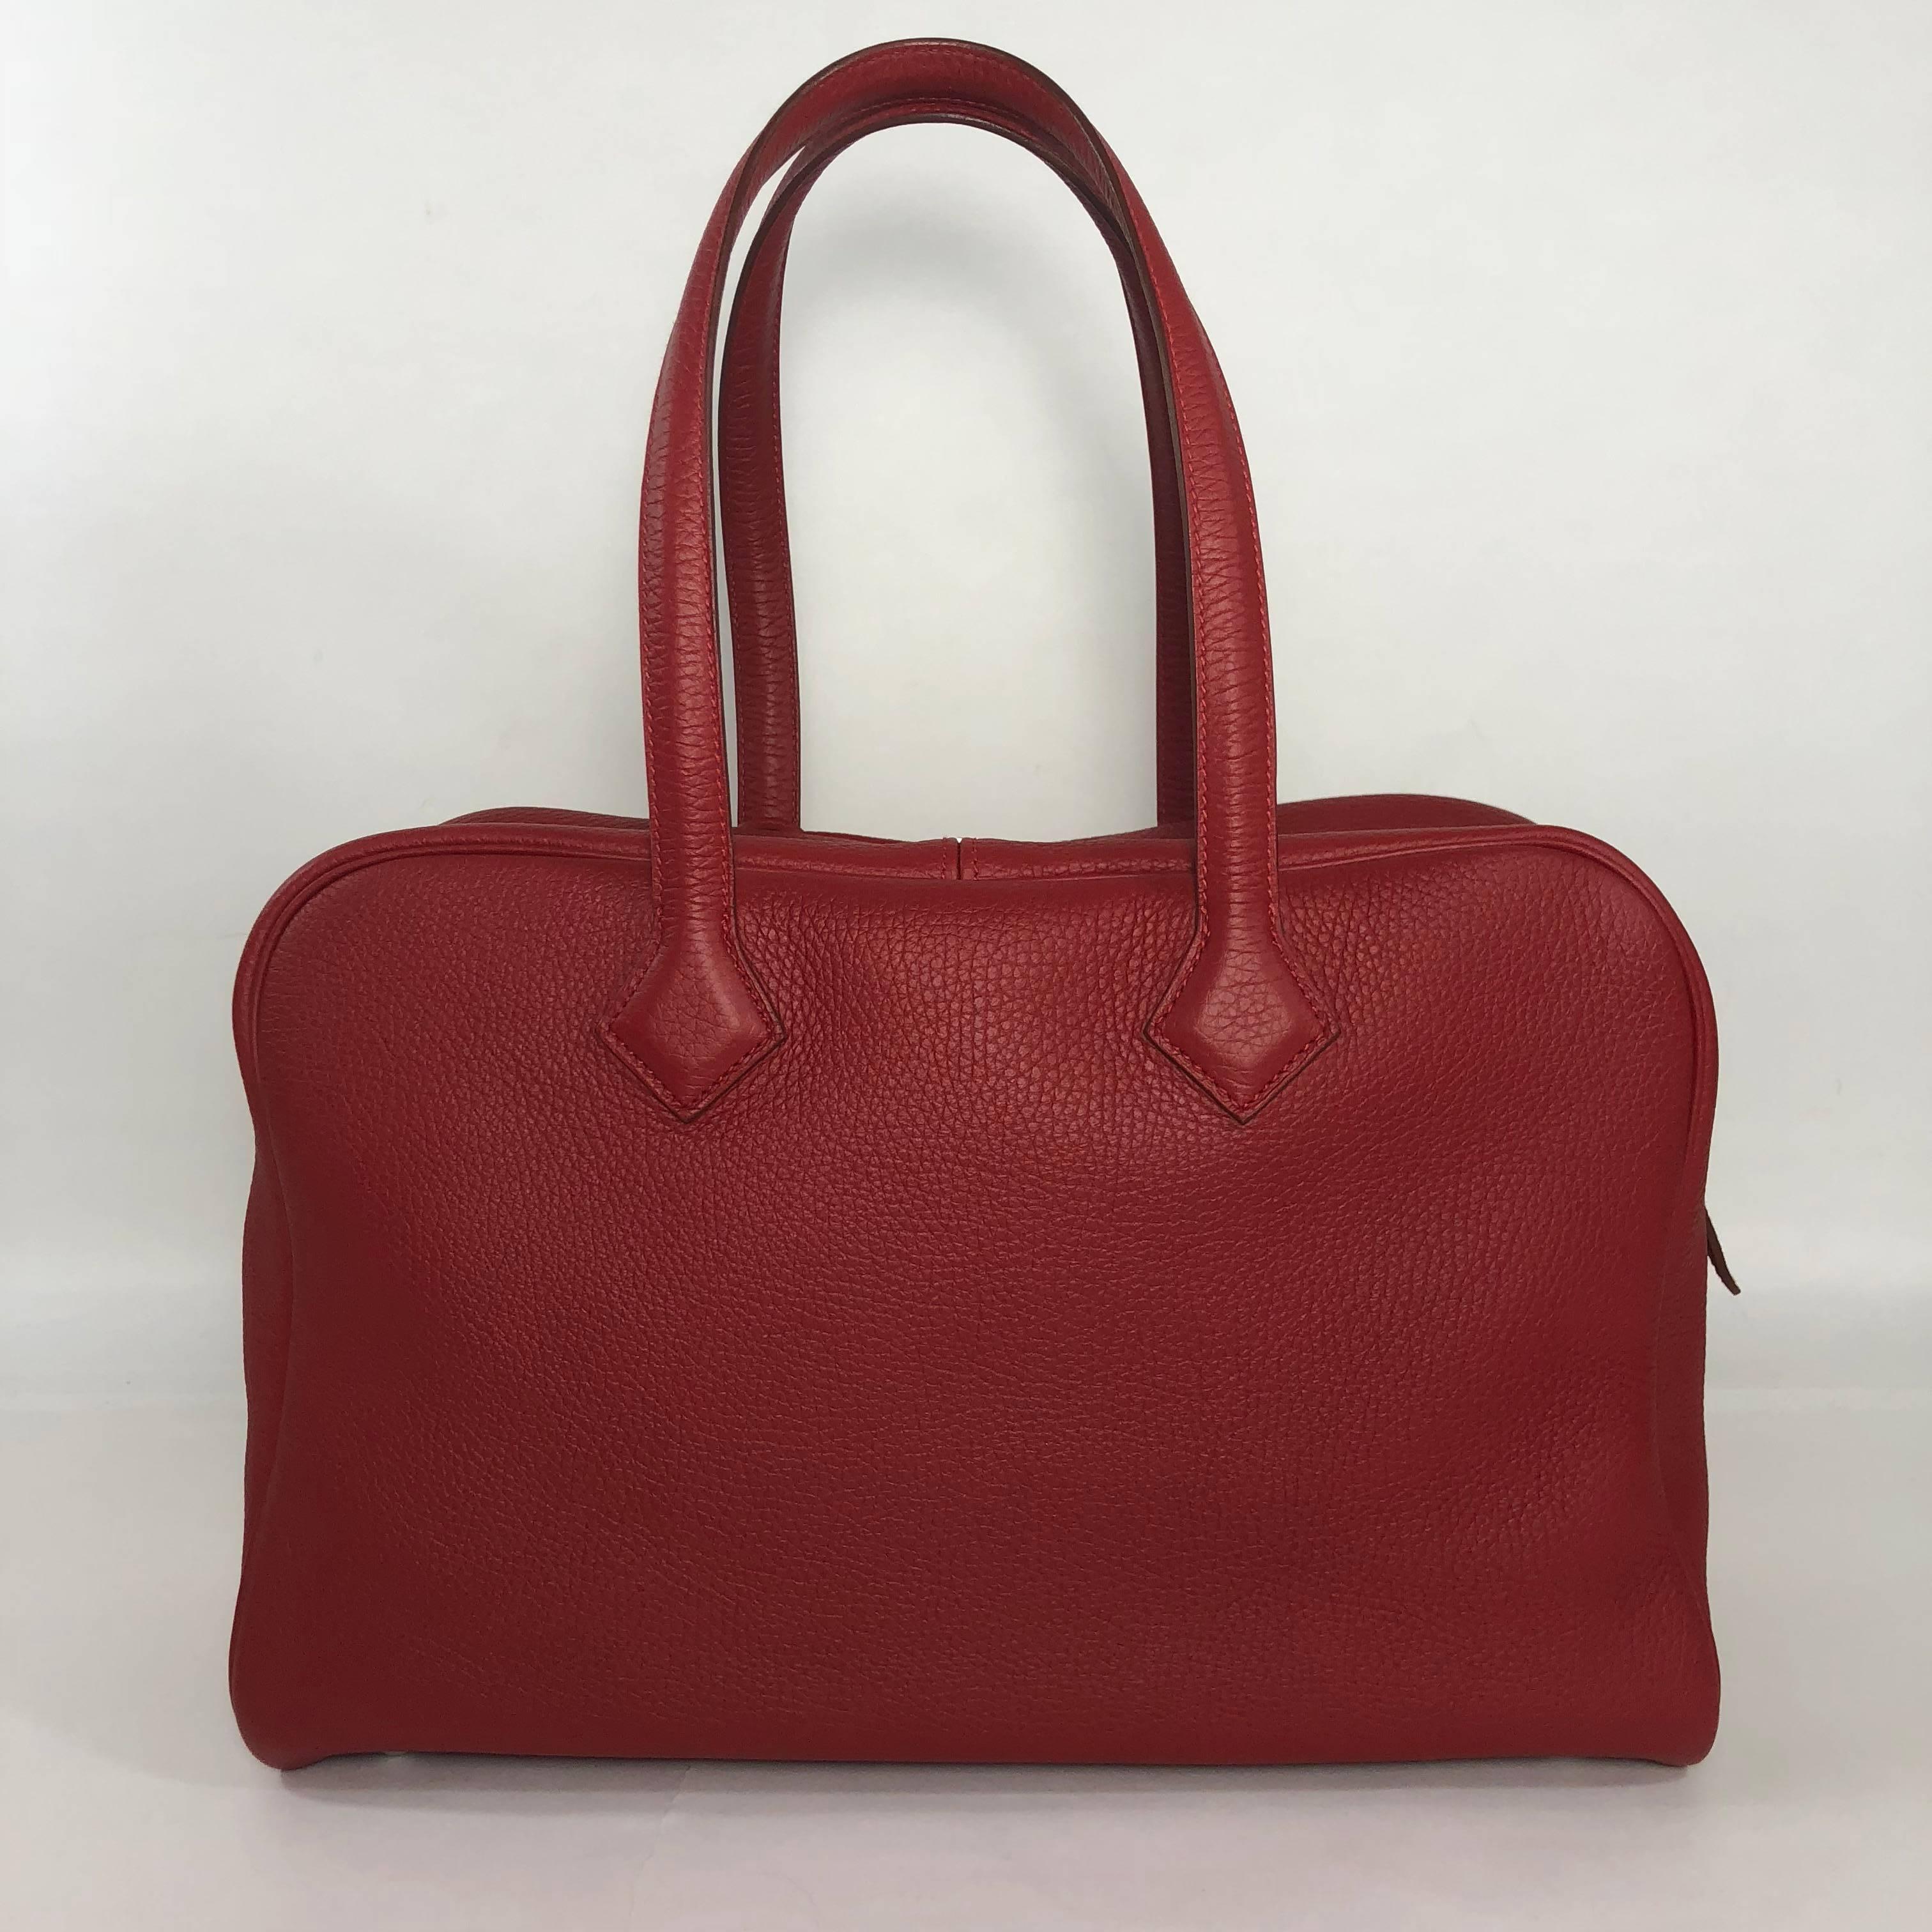 MODEL - Hermes Victoria Clemence Leather Handbag with Palladium Hardware in Red

CONDITION - Exceptional.  No visible signs of wear anywhere.

SKU - 2155

ORIGINAL RETAIL PRICE - 5150 + tax

DATE/SERIAL CODE - 63 J P Square

ORIGIN -